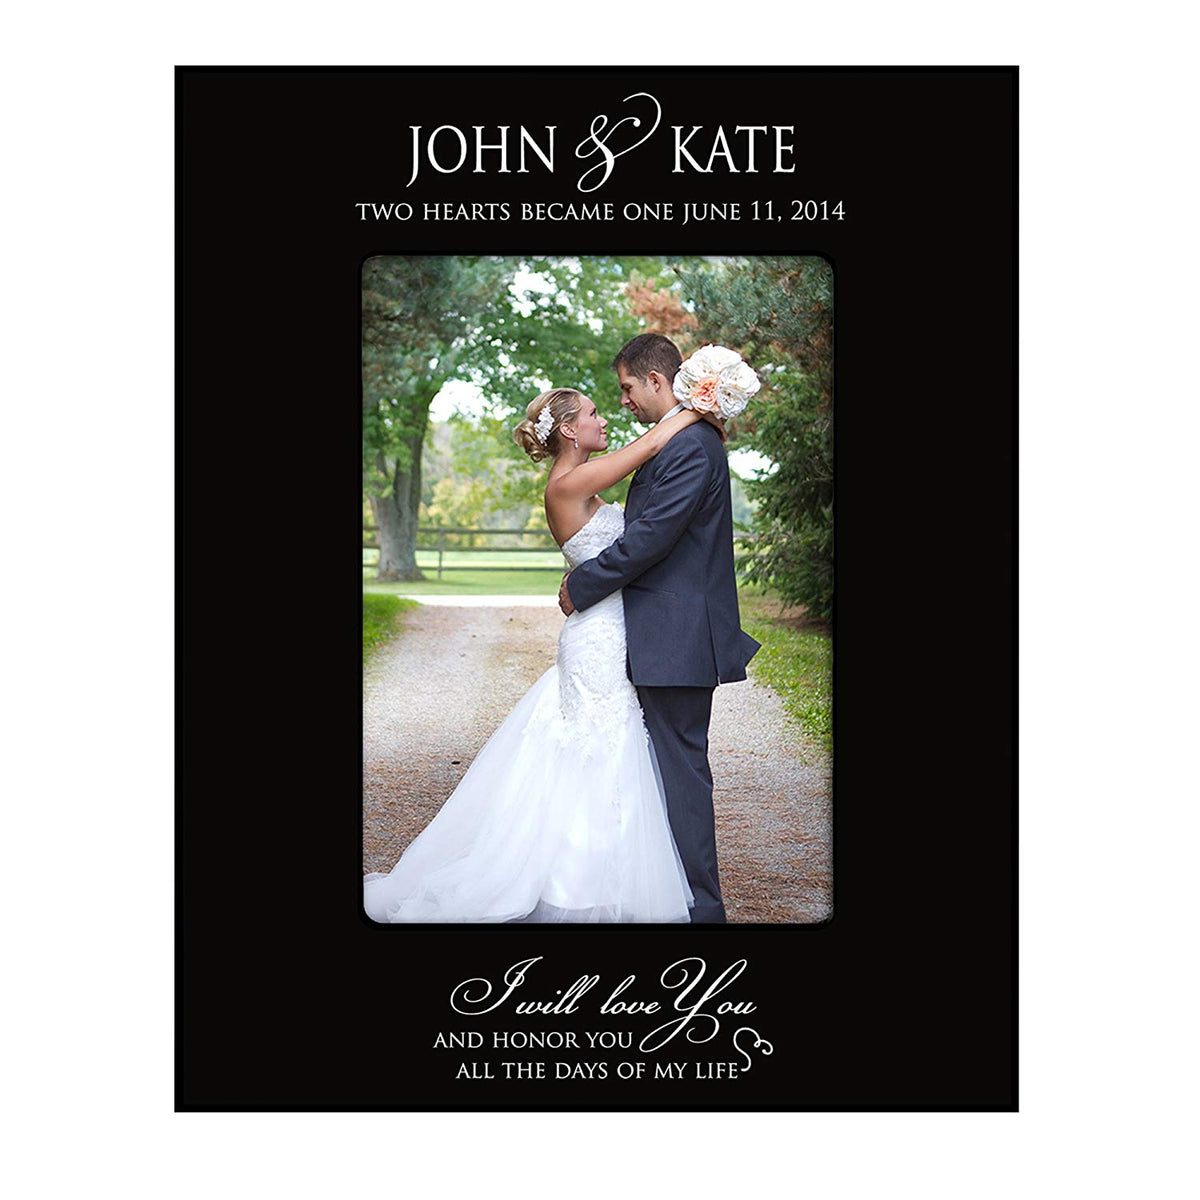 Wedding Photo Frame &quot; Two Hearts Became One &quot; Holds 4x6 Photo